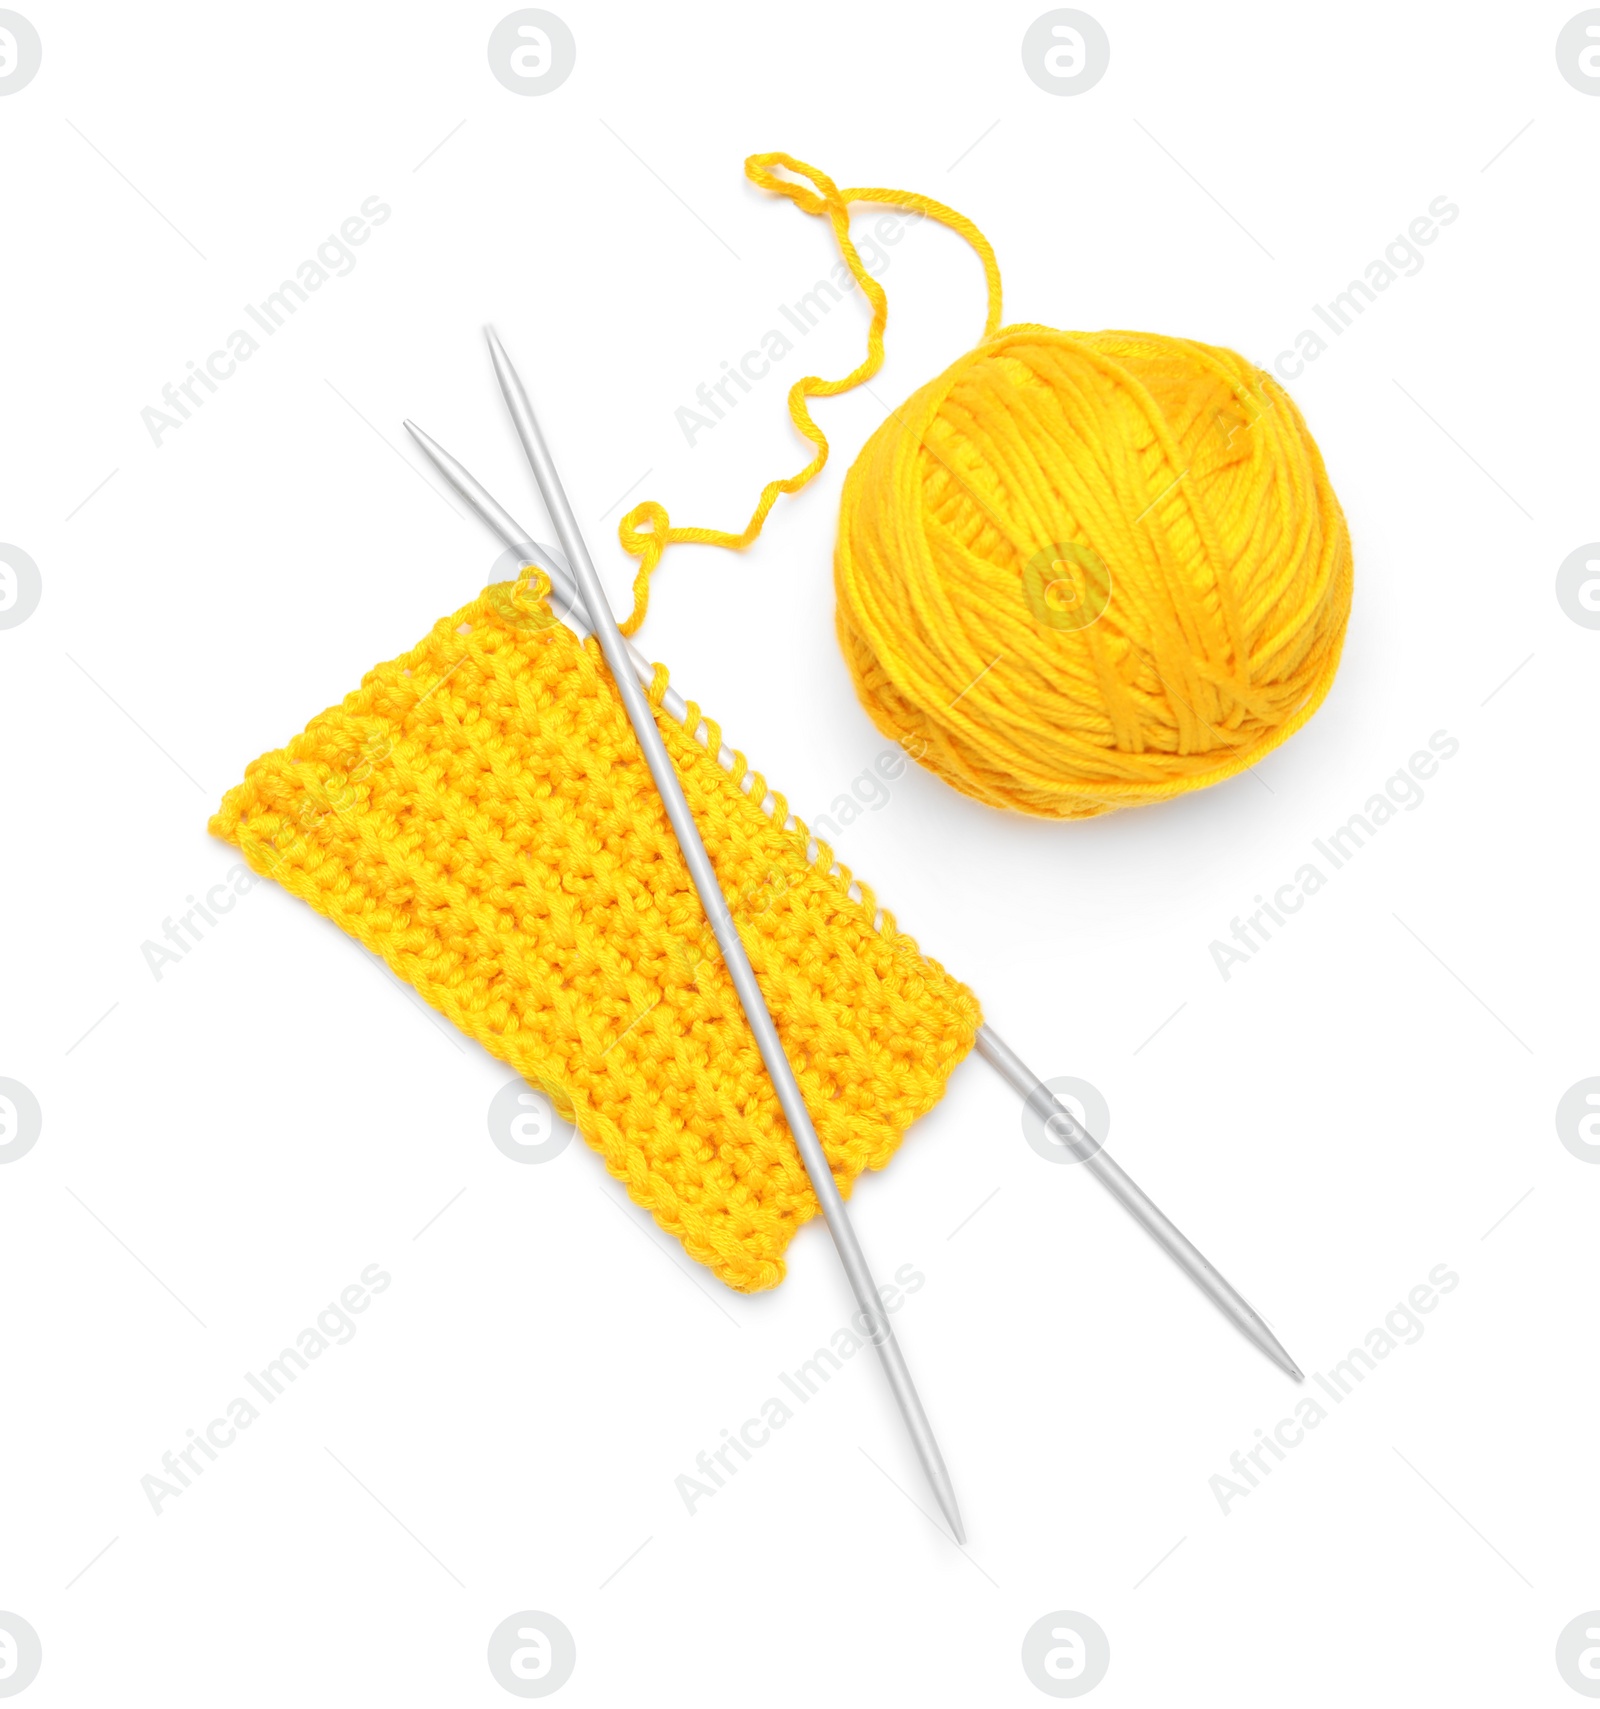 Photo of Soft yellow woolen yarn, knitting and metal needles on white background, top view